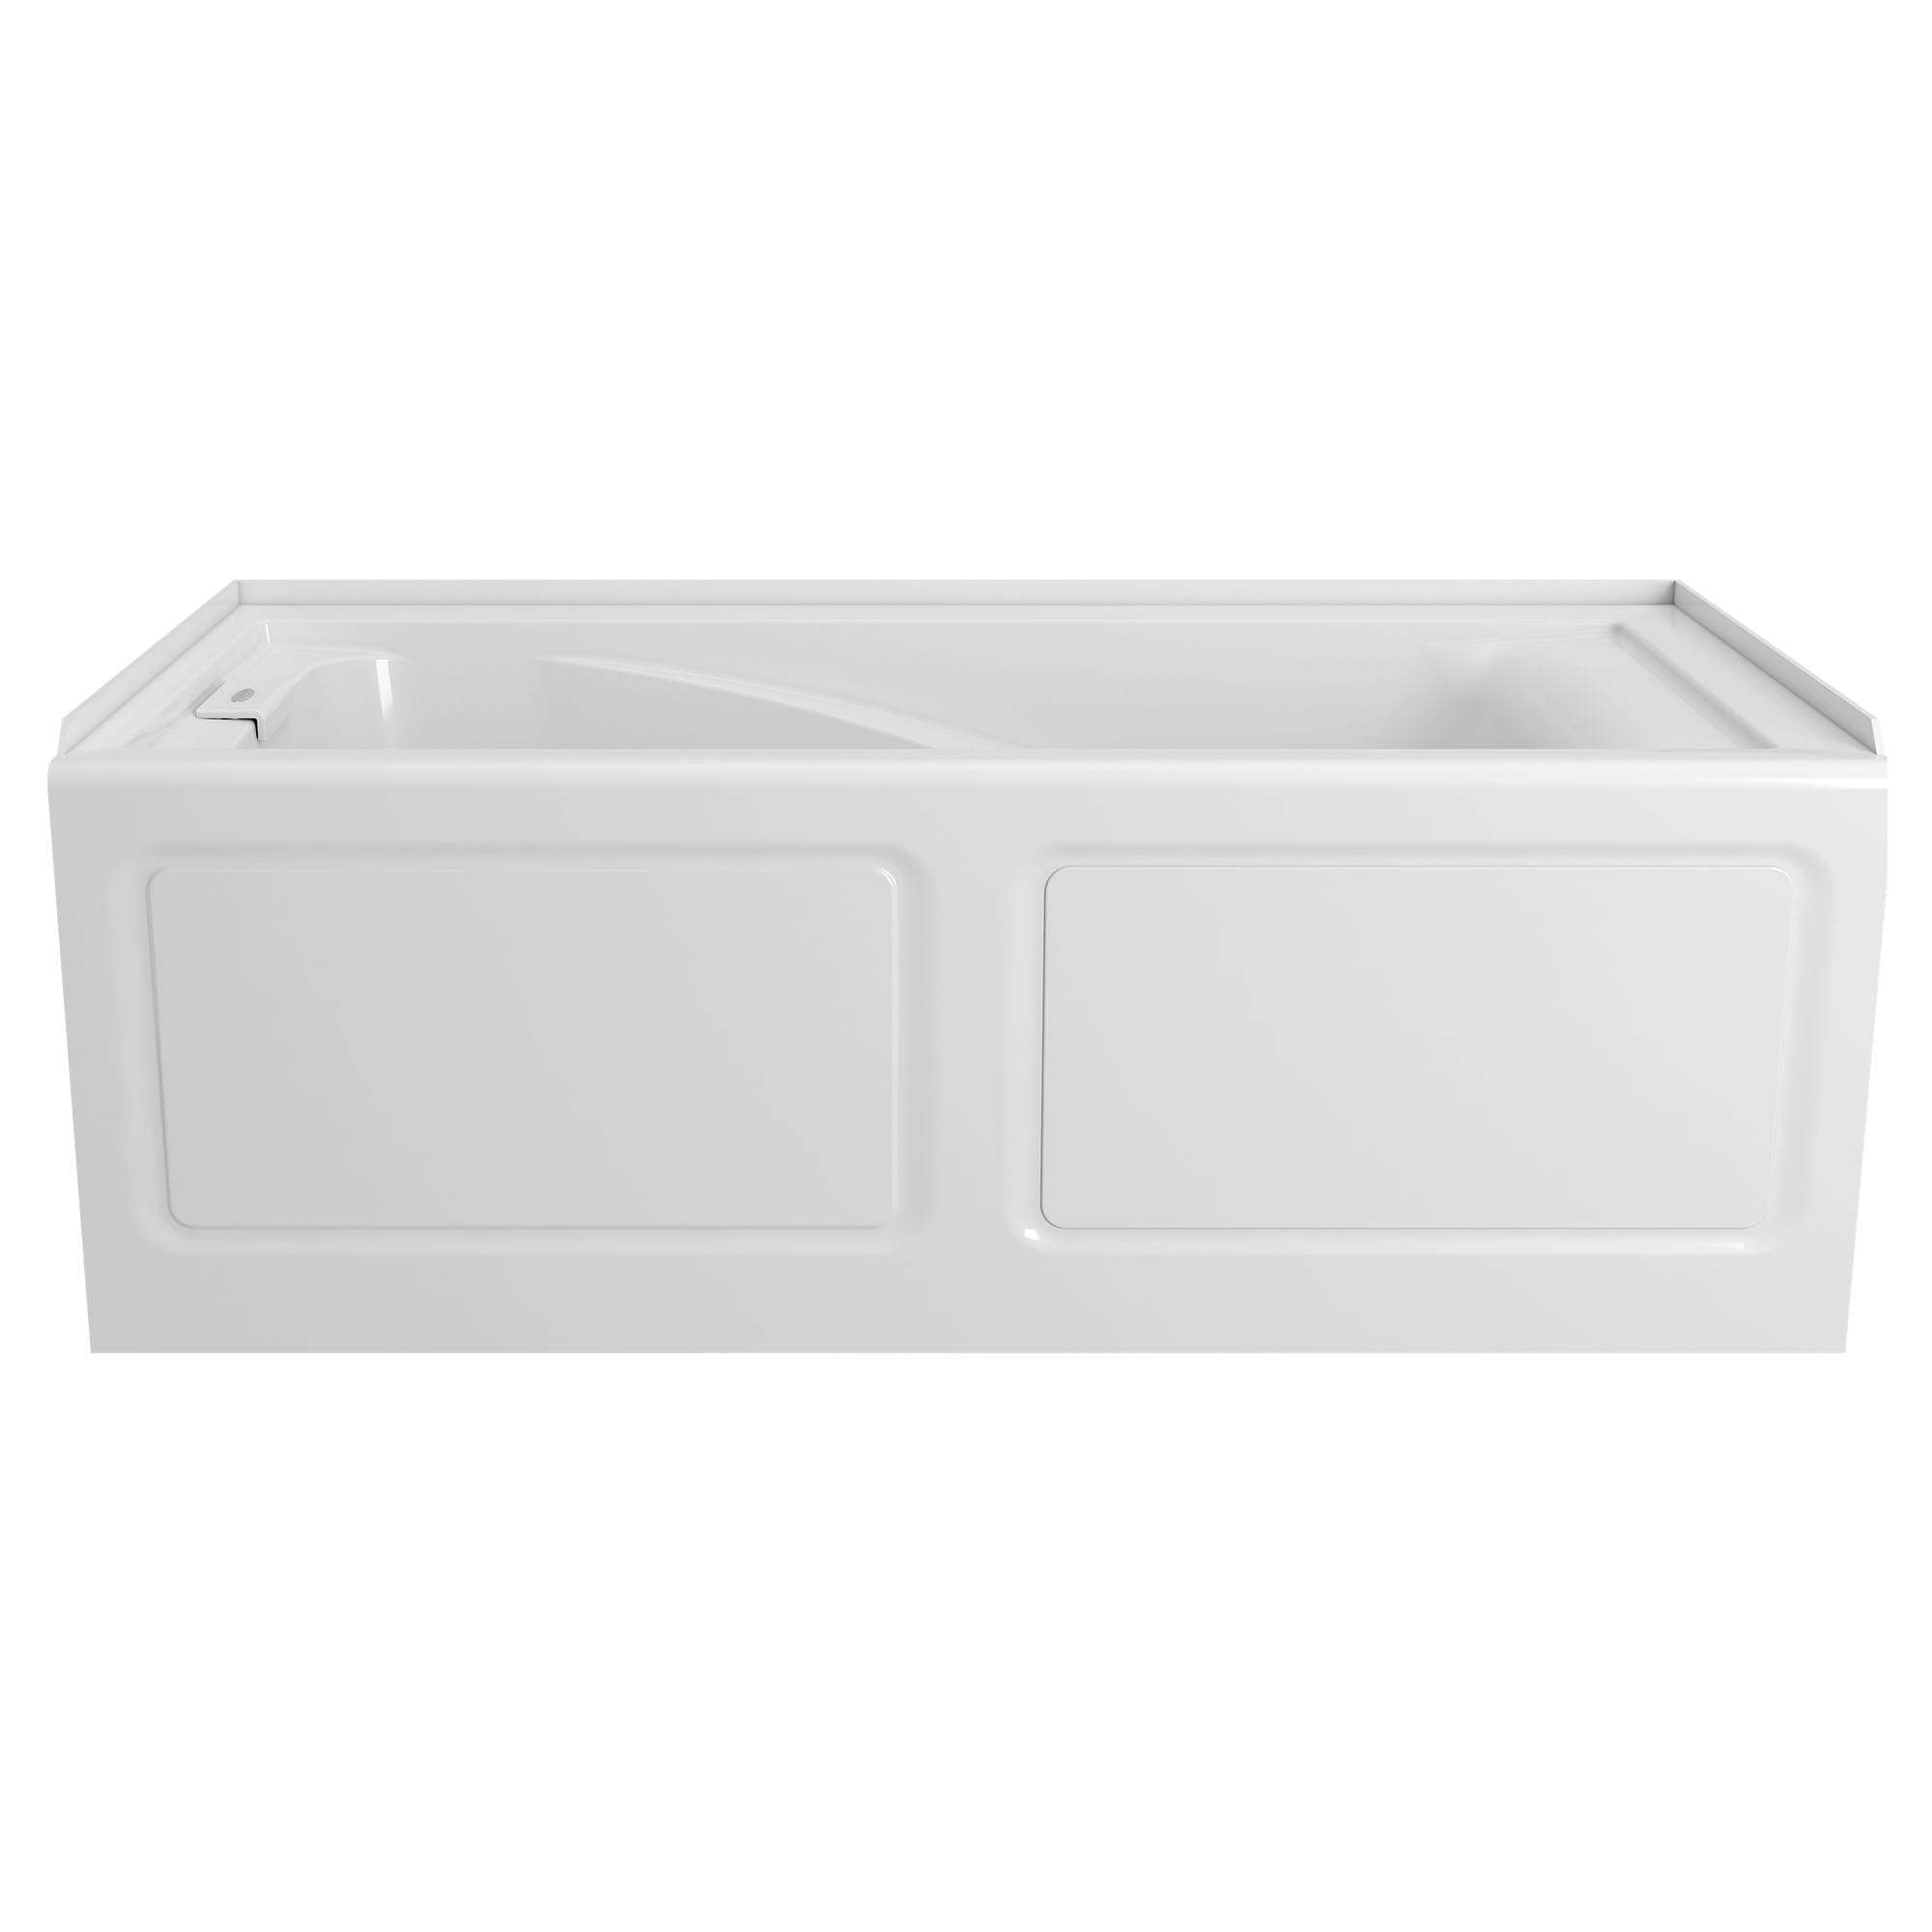 EverClean 60x32 Inch Integral Apron Deep Soak Bathtub with Left Hand Outlet WHITE